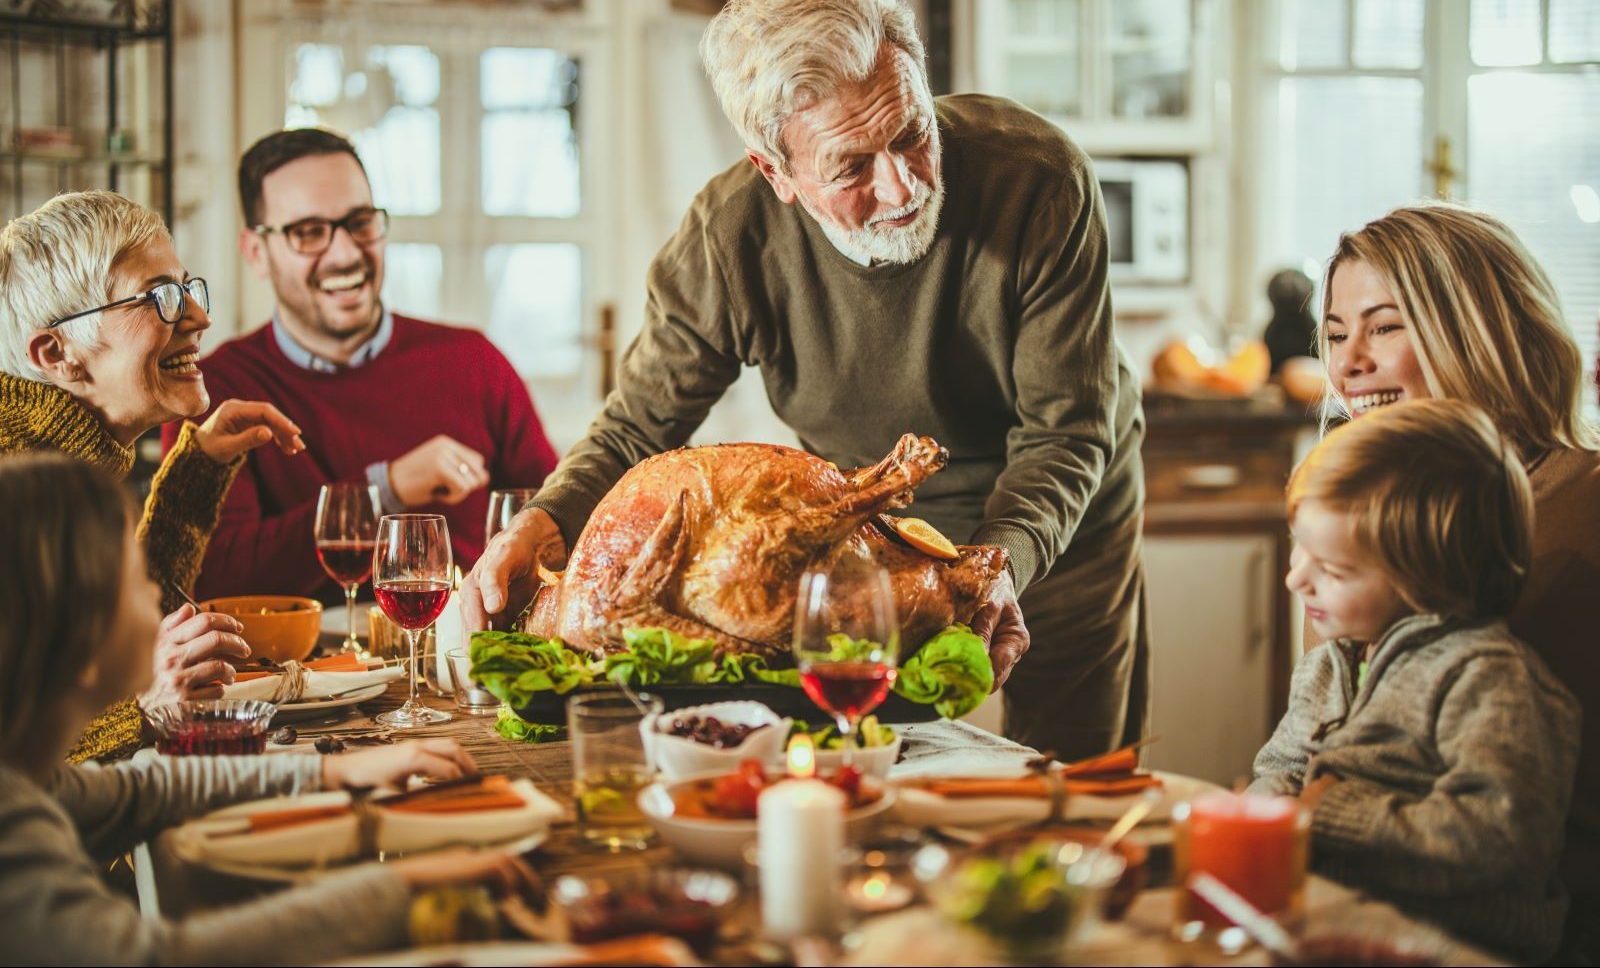 These four tips can help you enjoy a healthy Thanksgiving without overindulging or setting yourself down a path of bad eating habits.